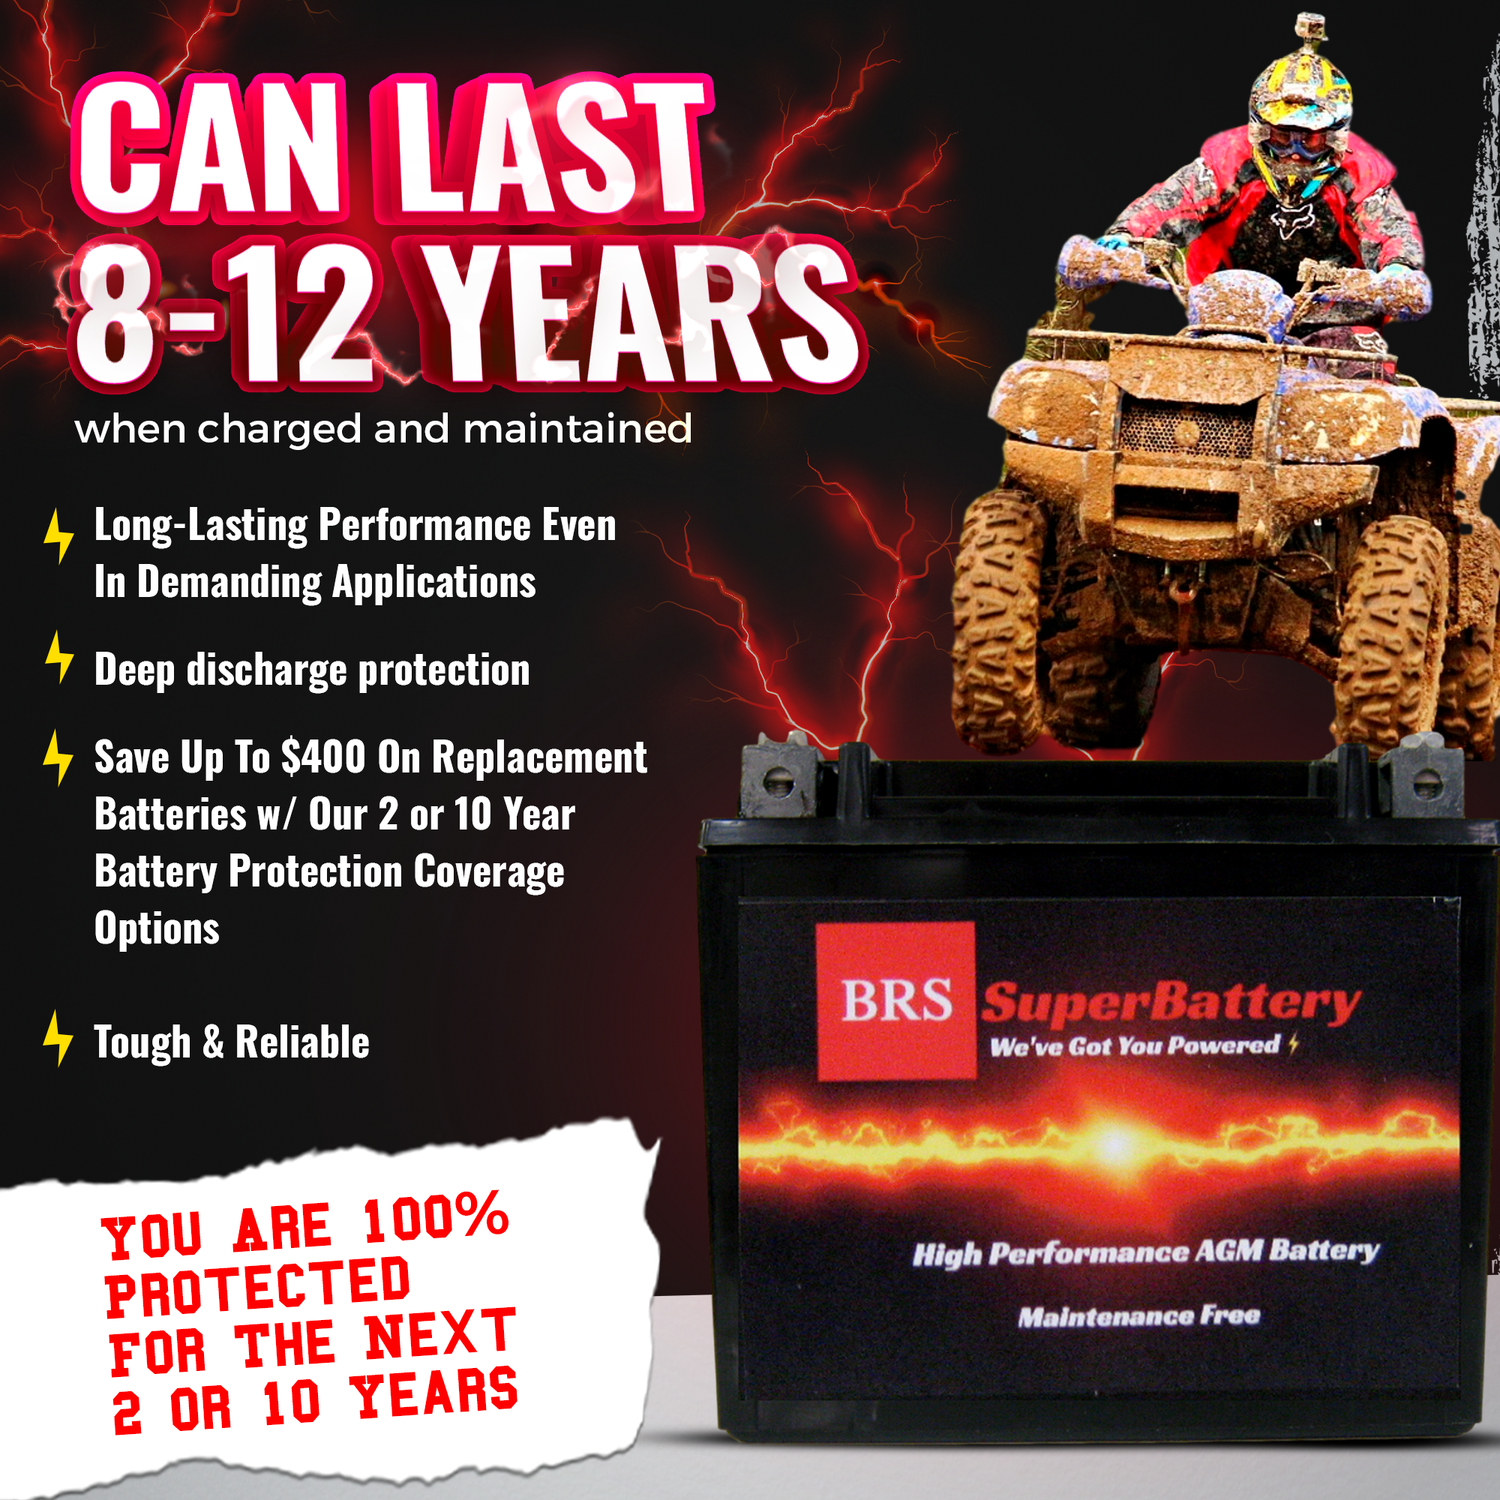 BRS14AHL-BS 12v High Performance Sealed AGM PowerSport 2 Year Battery - BRS Super Battery